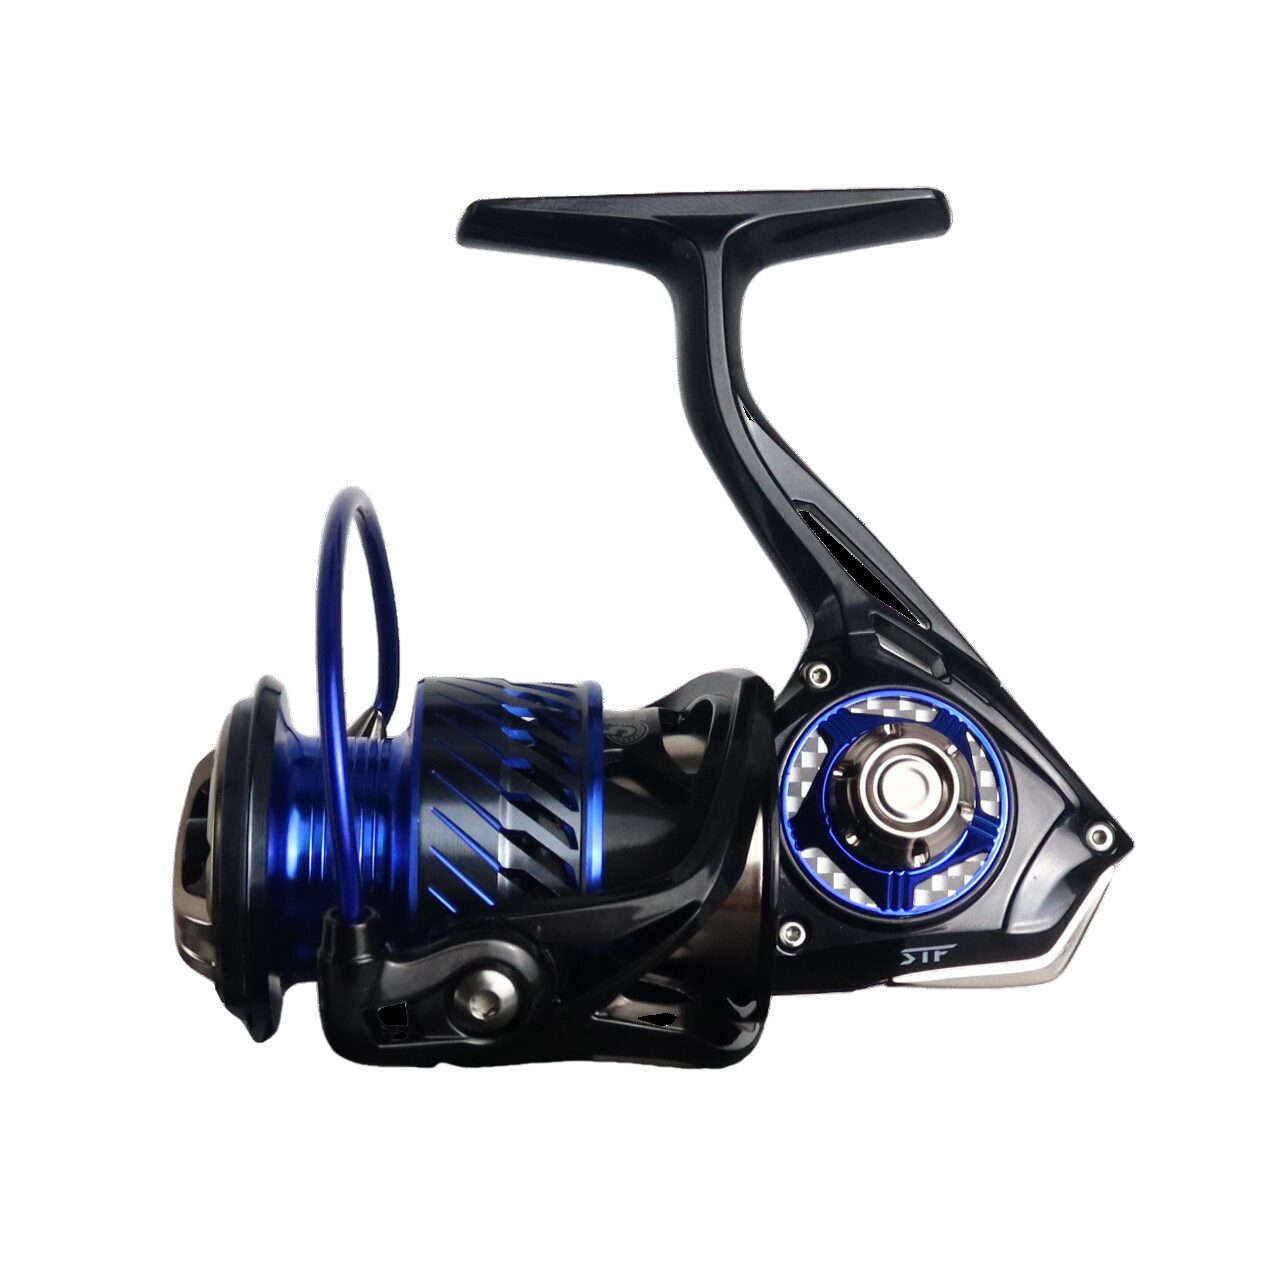 STF GLIDER E Series Spinning Reel